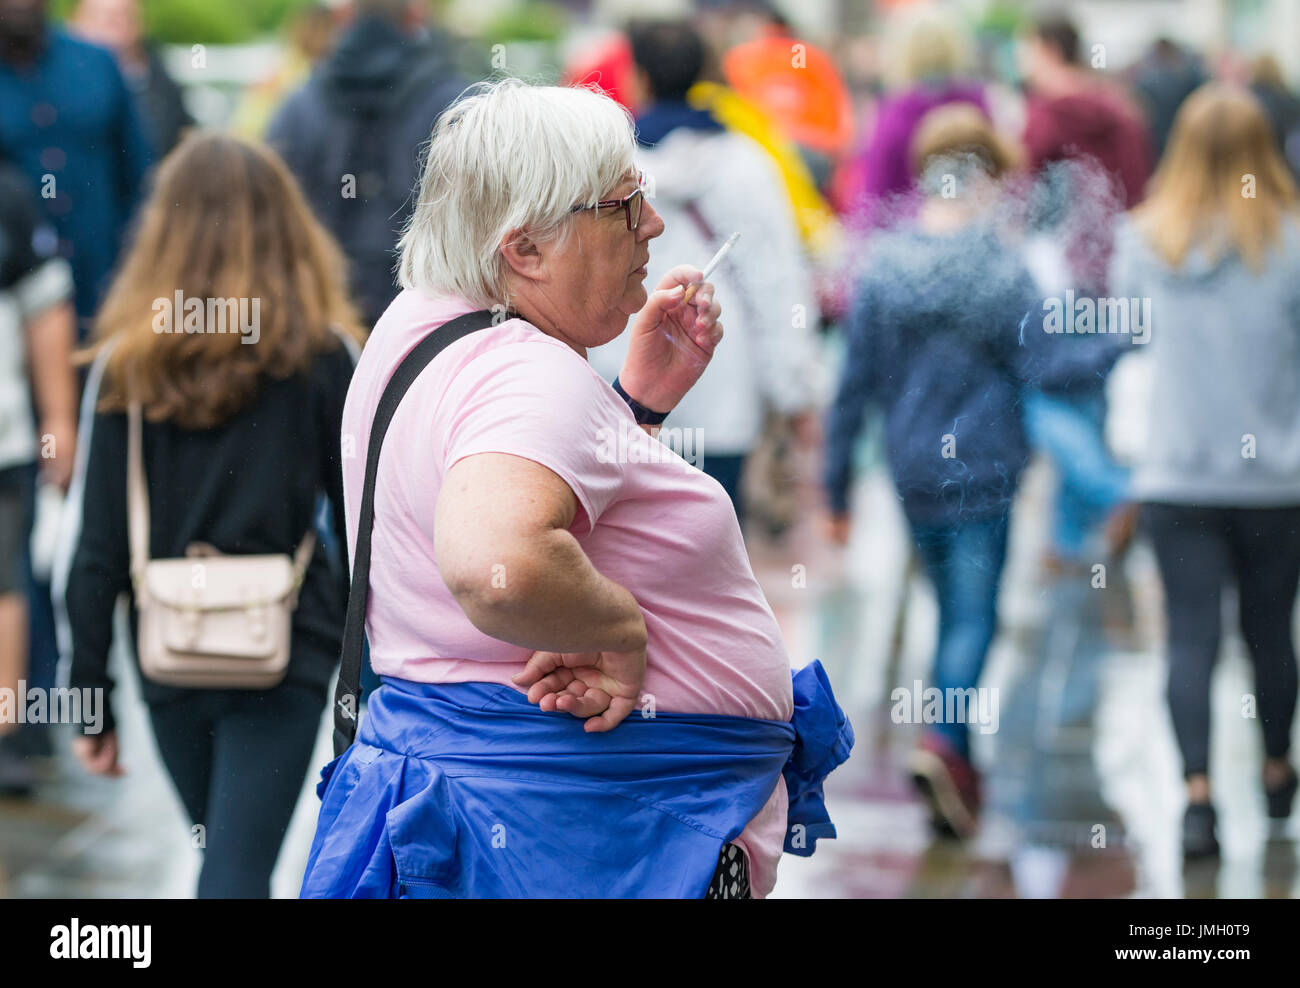 Middle aged overweight Caucasian woman smoking outside in a busy crowded city, in the UK. Unhealthy lifestyle concept. Stock Photo